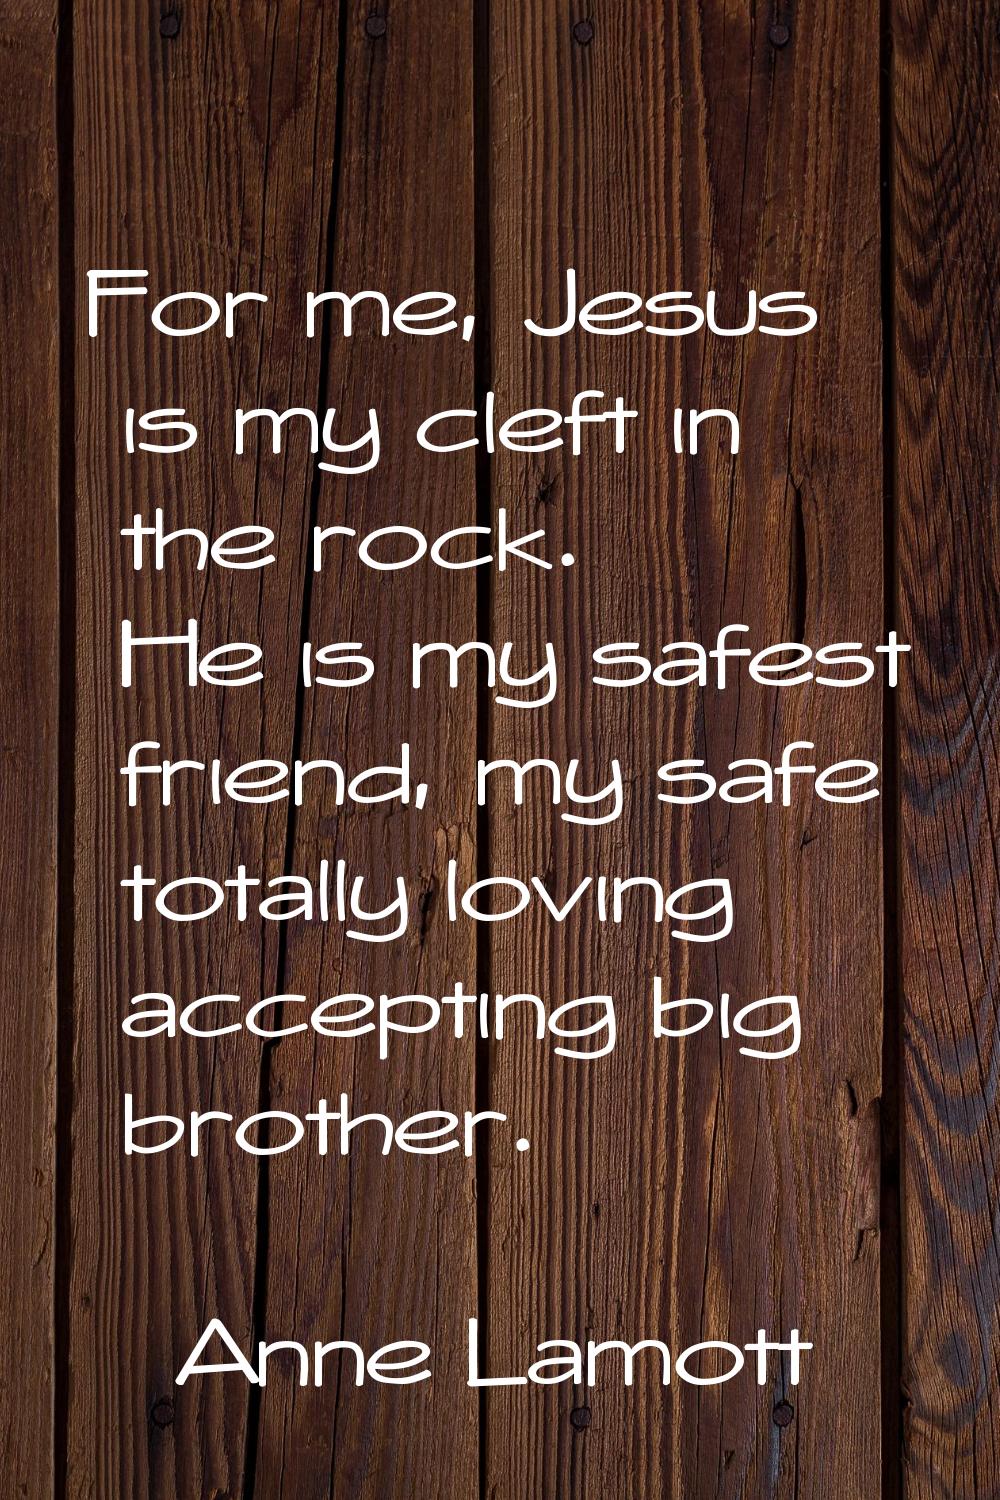 For me, Jesus is my cleft in the rock. He is my safest friend, my safe totally loving accepting big